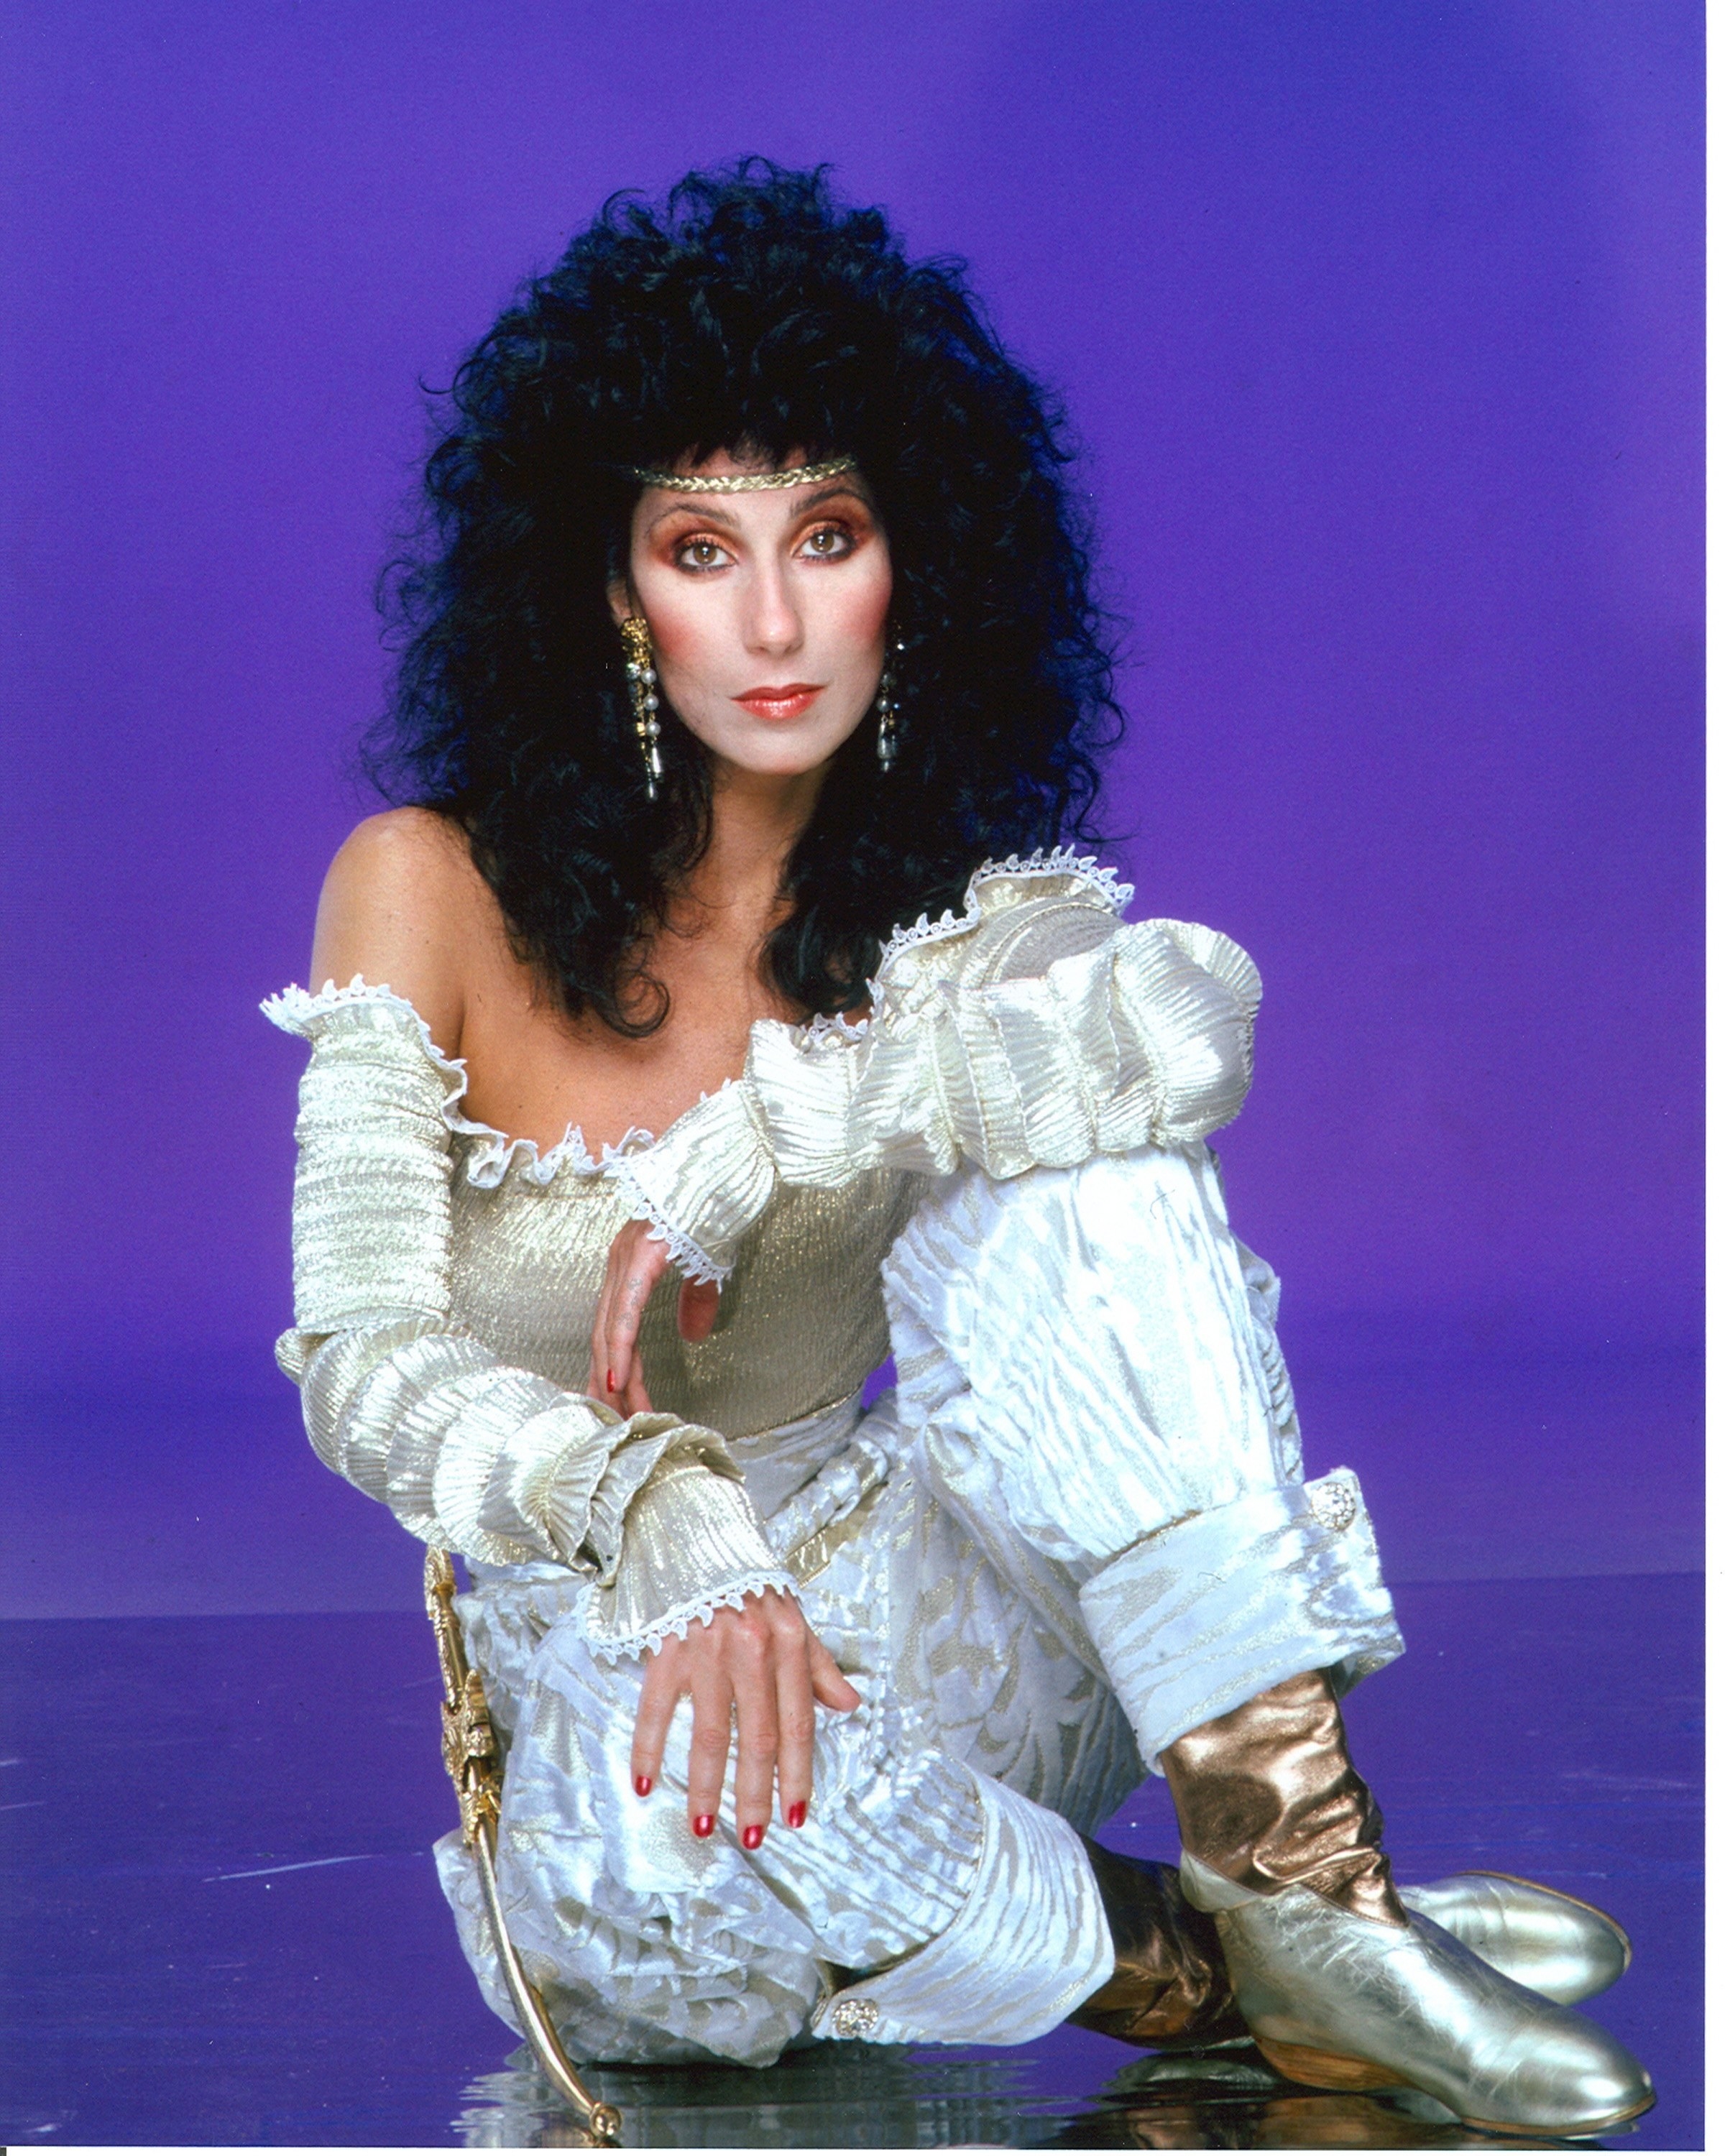 Cher with big hair